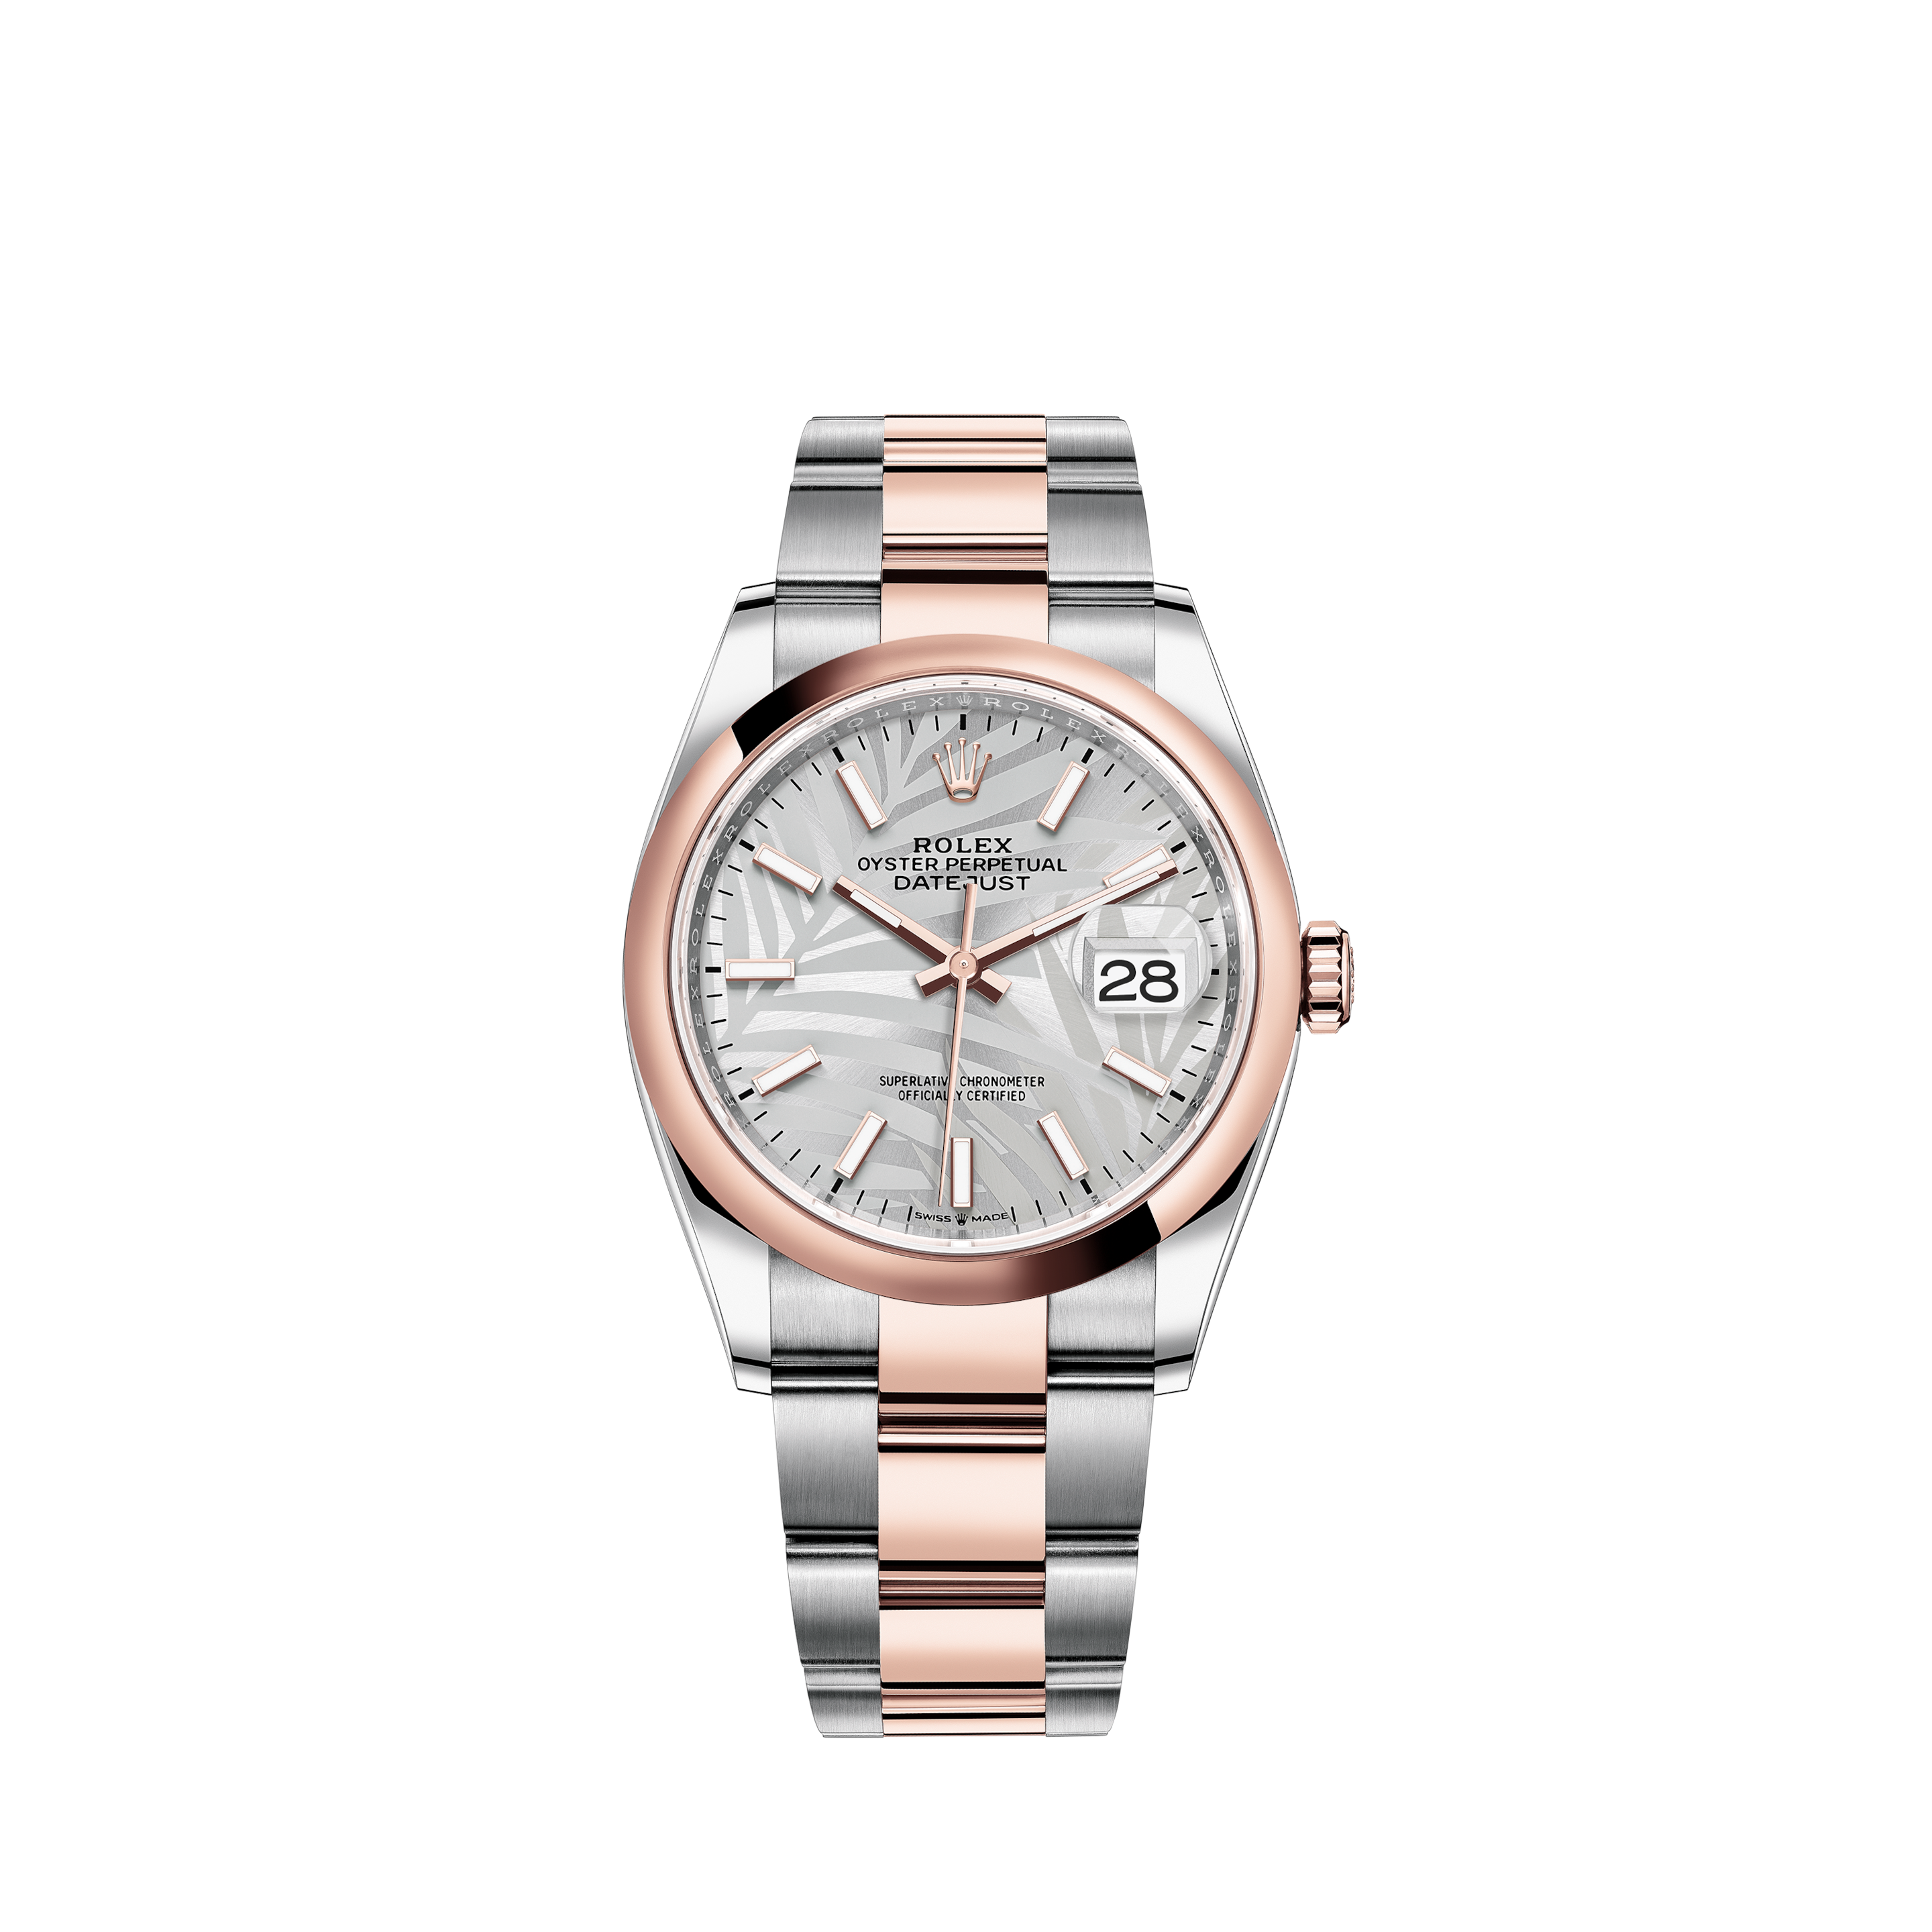 Rolex Women's New Style Two-Tone Datejust with Custom Diamond Bezel and Mother of Pearl Diamond DialRolex Women's New Style Two-Tone Datejust with Custom Diamond Bezel and Silver Diamond Dial